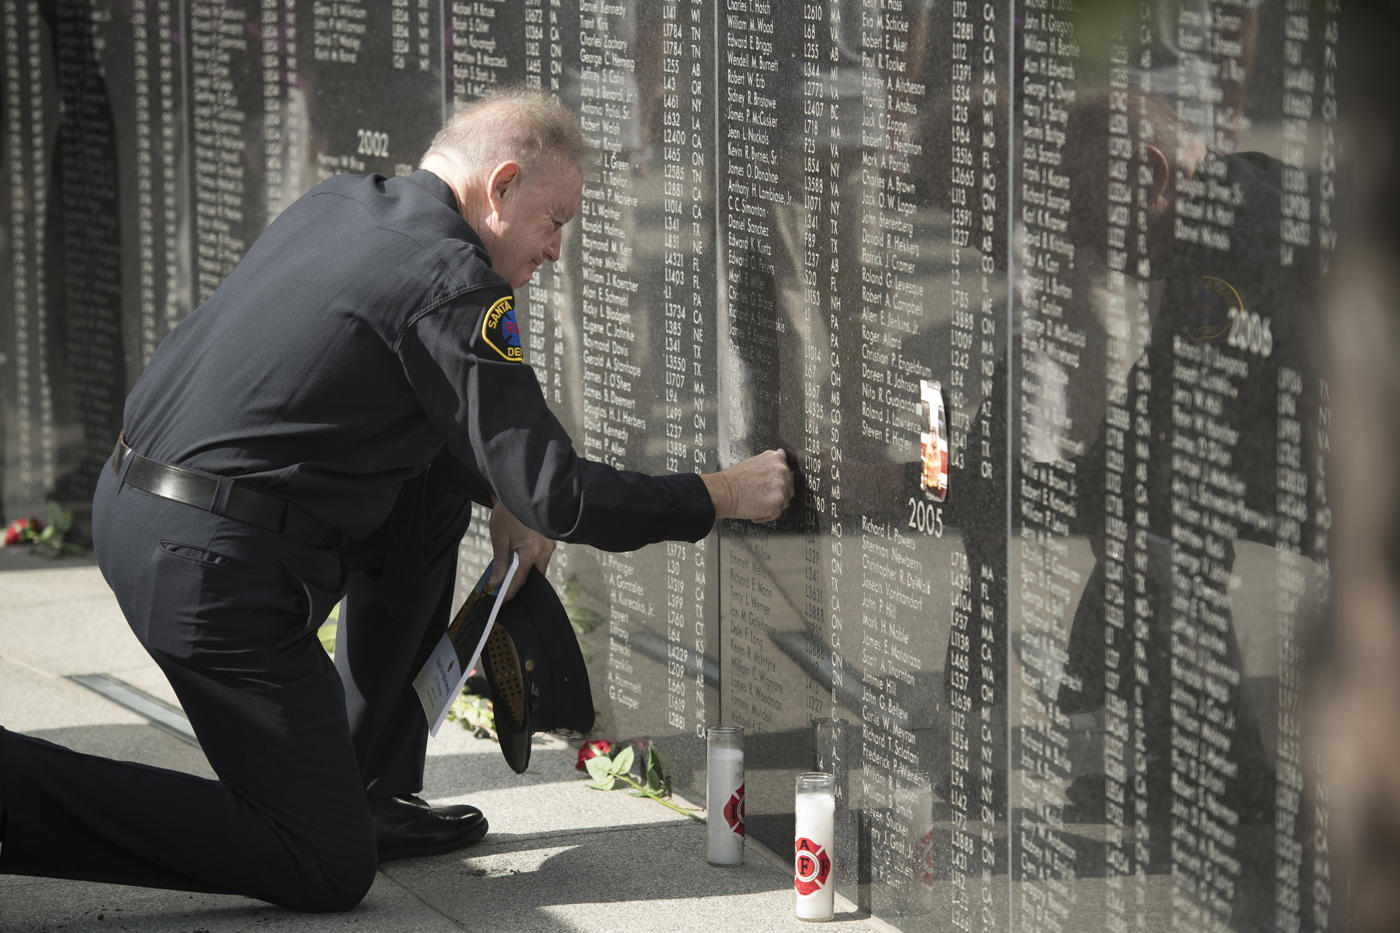 California firefighter Tim Gilligan touches the name of his friend, fallen firefighter Daniel Bendiksen, on a memorial wal. Bendiksen died in 2003 of work-related cancer. | Mark Reis